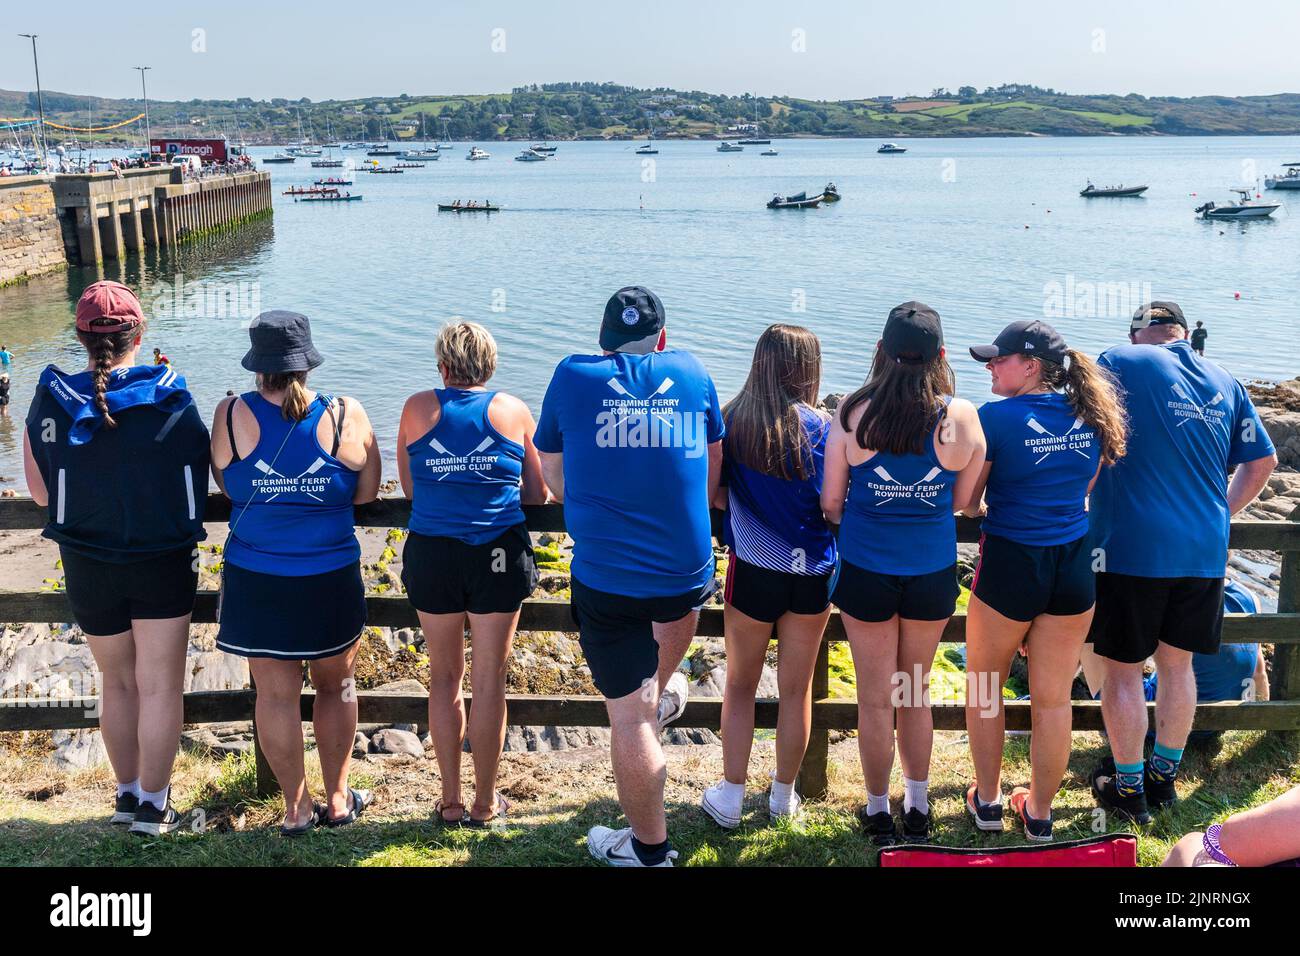 Schull, West Cork, Ireland. 13th Aug, 2022. The 2022 Irish Coastal Rowing Championships is taking place this weekend in Schull, West Cork. A total of 290 crews from different clubs are taking part in the event which finishes Sunday evening. Members of Edermine Ferry Rowing Club watch the action. Credit: AG News/Alamy Live News Stock Photo